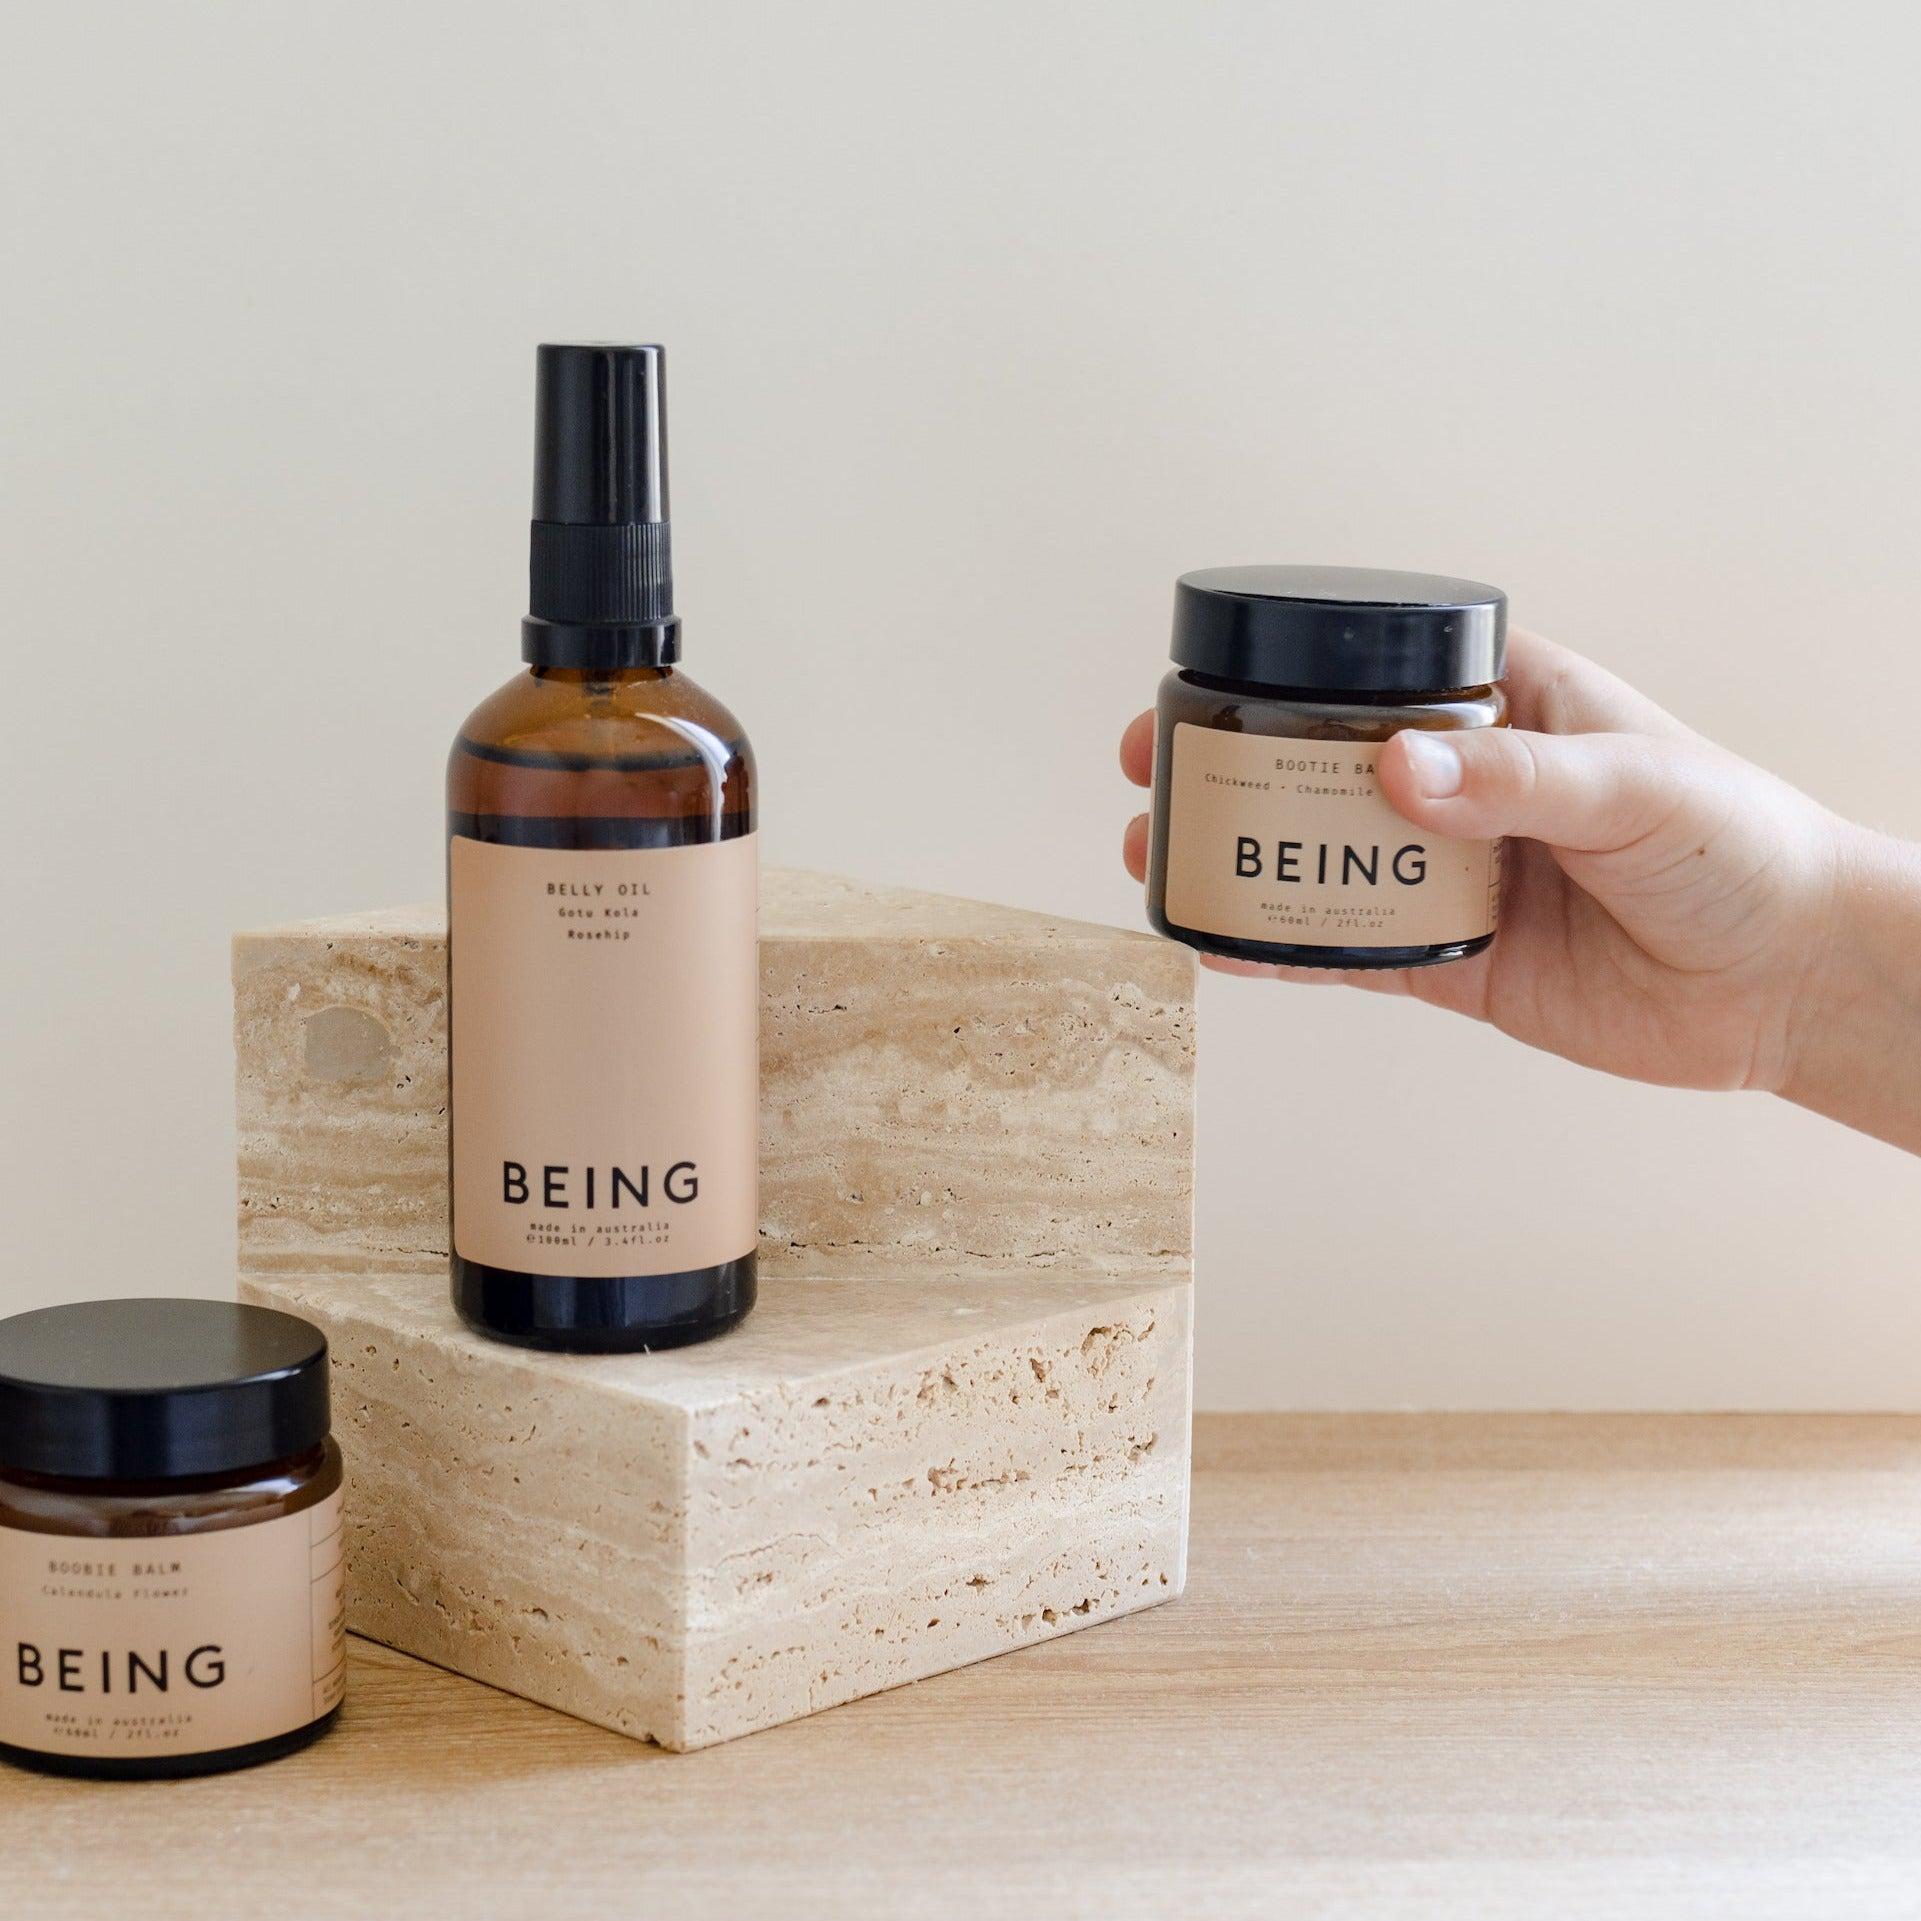 A hand holding a jar of Being Skincare's Bootie balm.